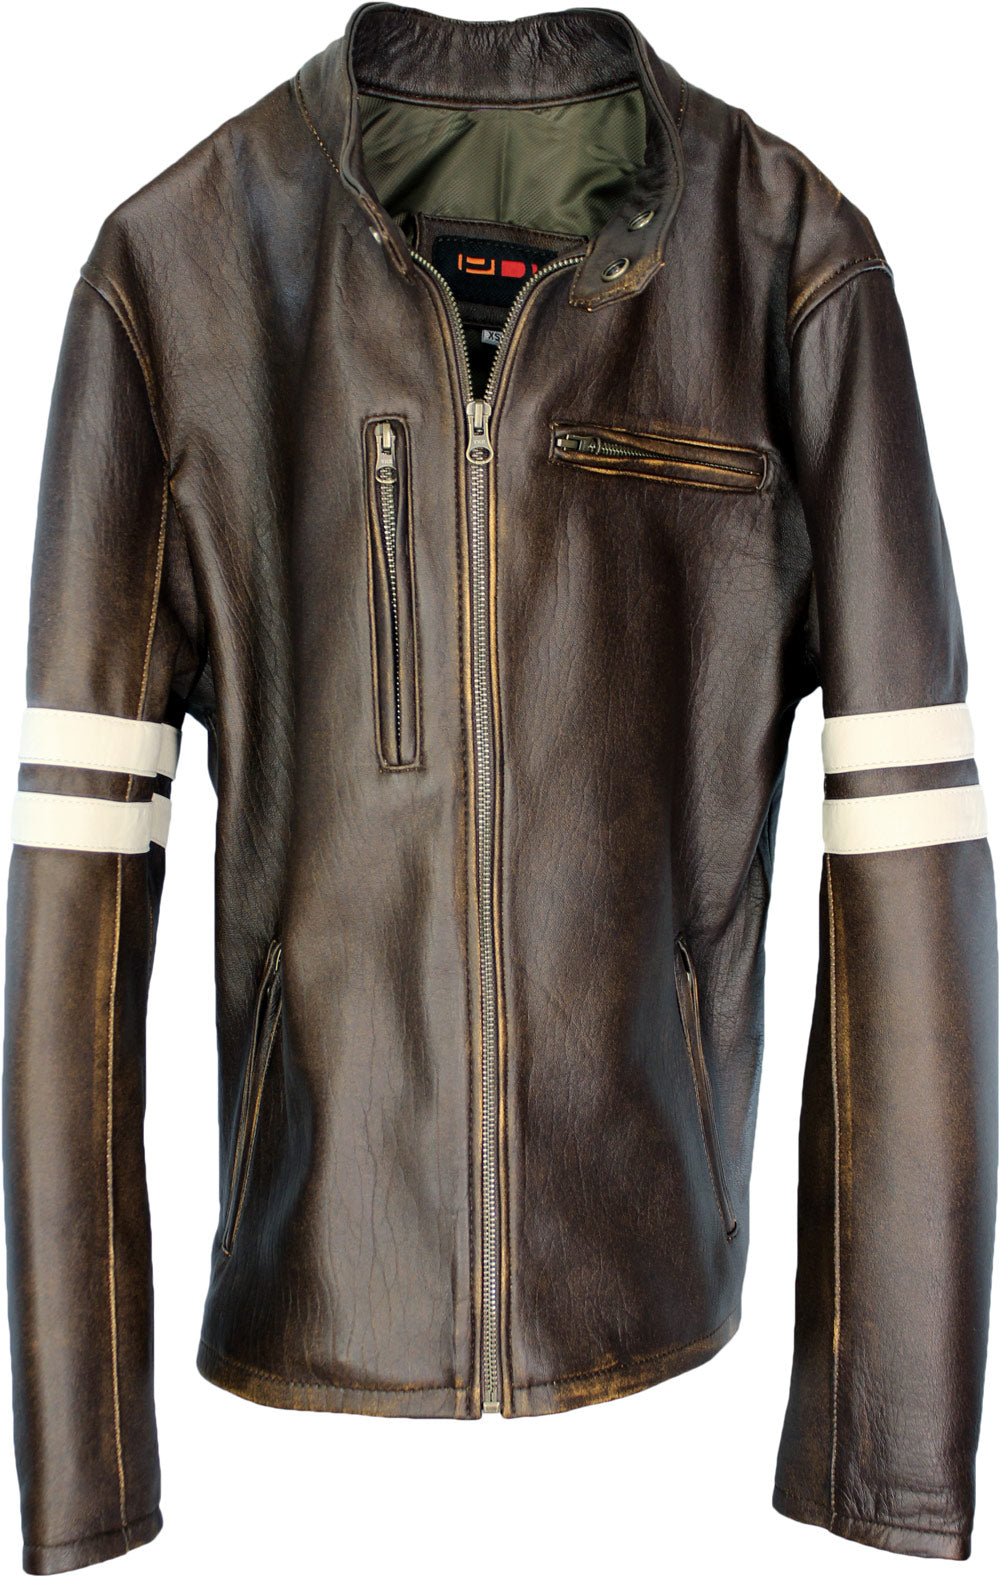 MUSTANG Leather Jacket Distressed Brown PDCollection Racer Online Stripes– Cafe - - Leatherwear Shop